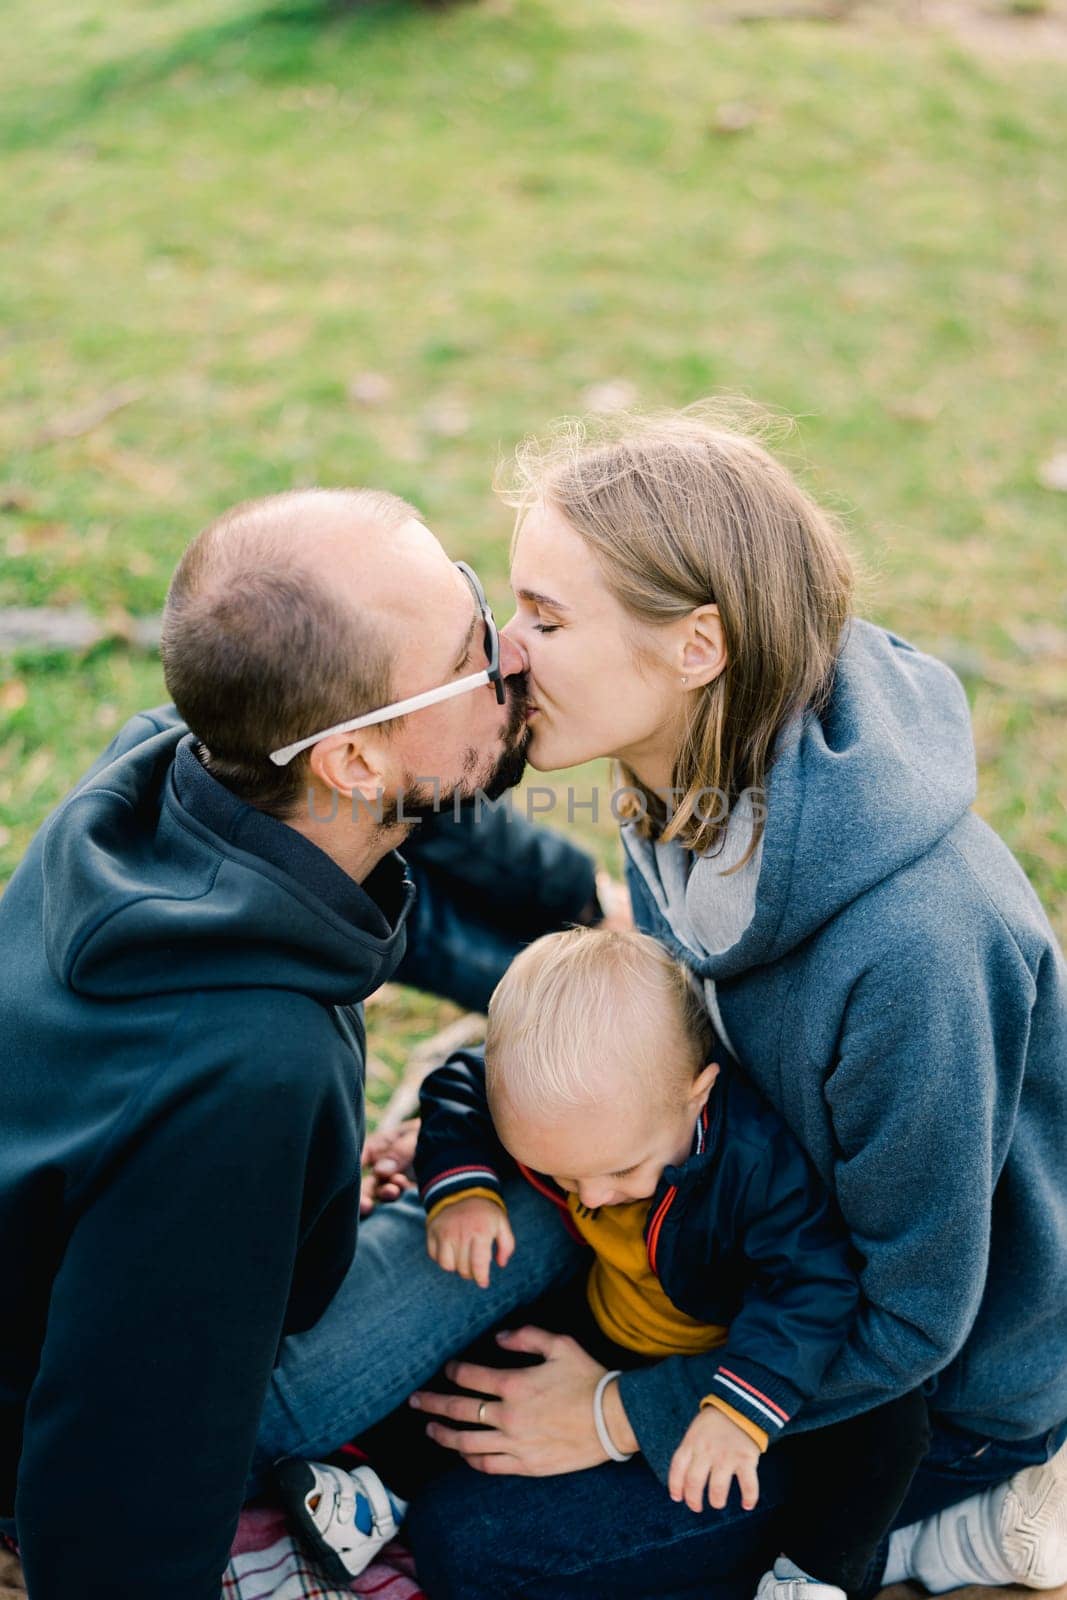 Dad kisses mom with a little boy on her lap while sitting on a green lawn. High quality photo